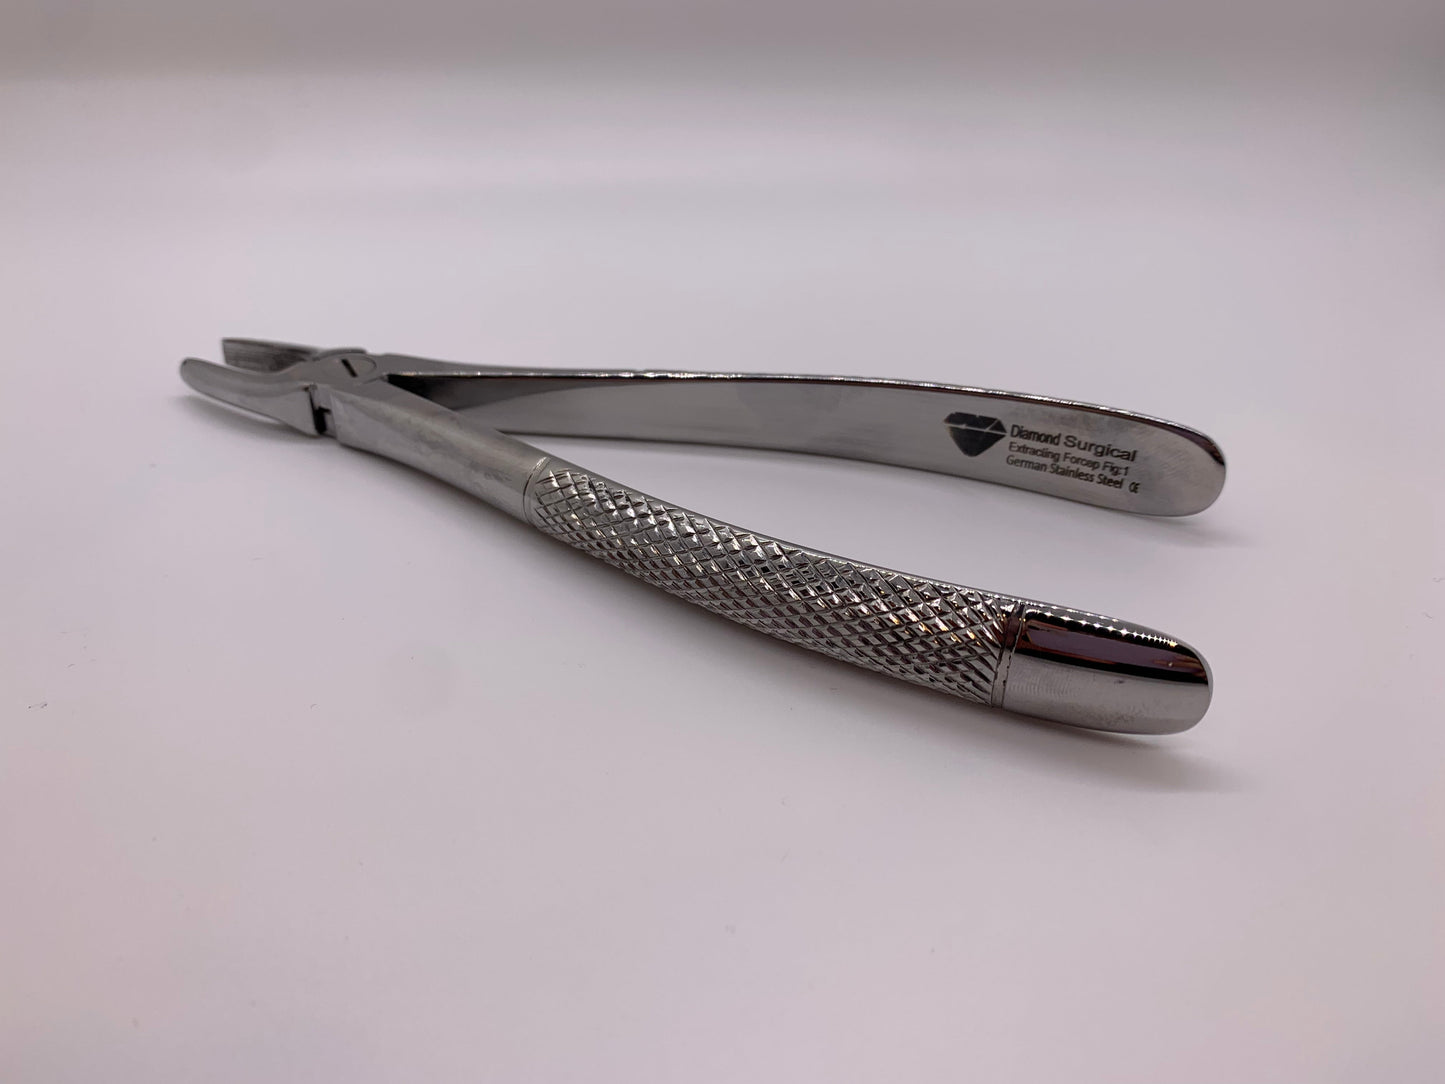 English Pattren Tooth Extracting Forcep Fig:1 With Serrated Jaws